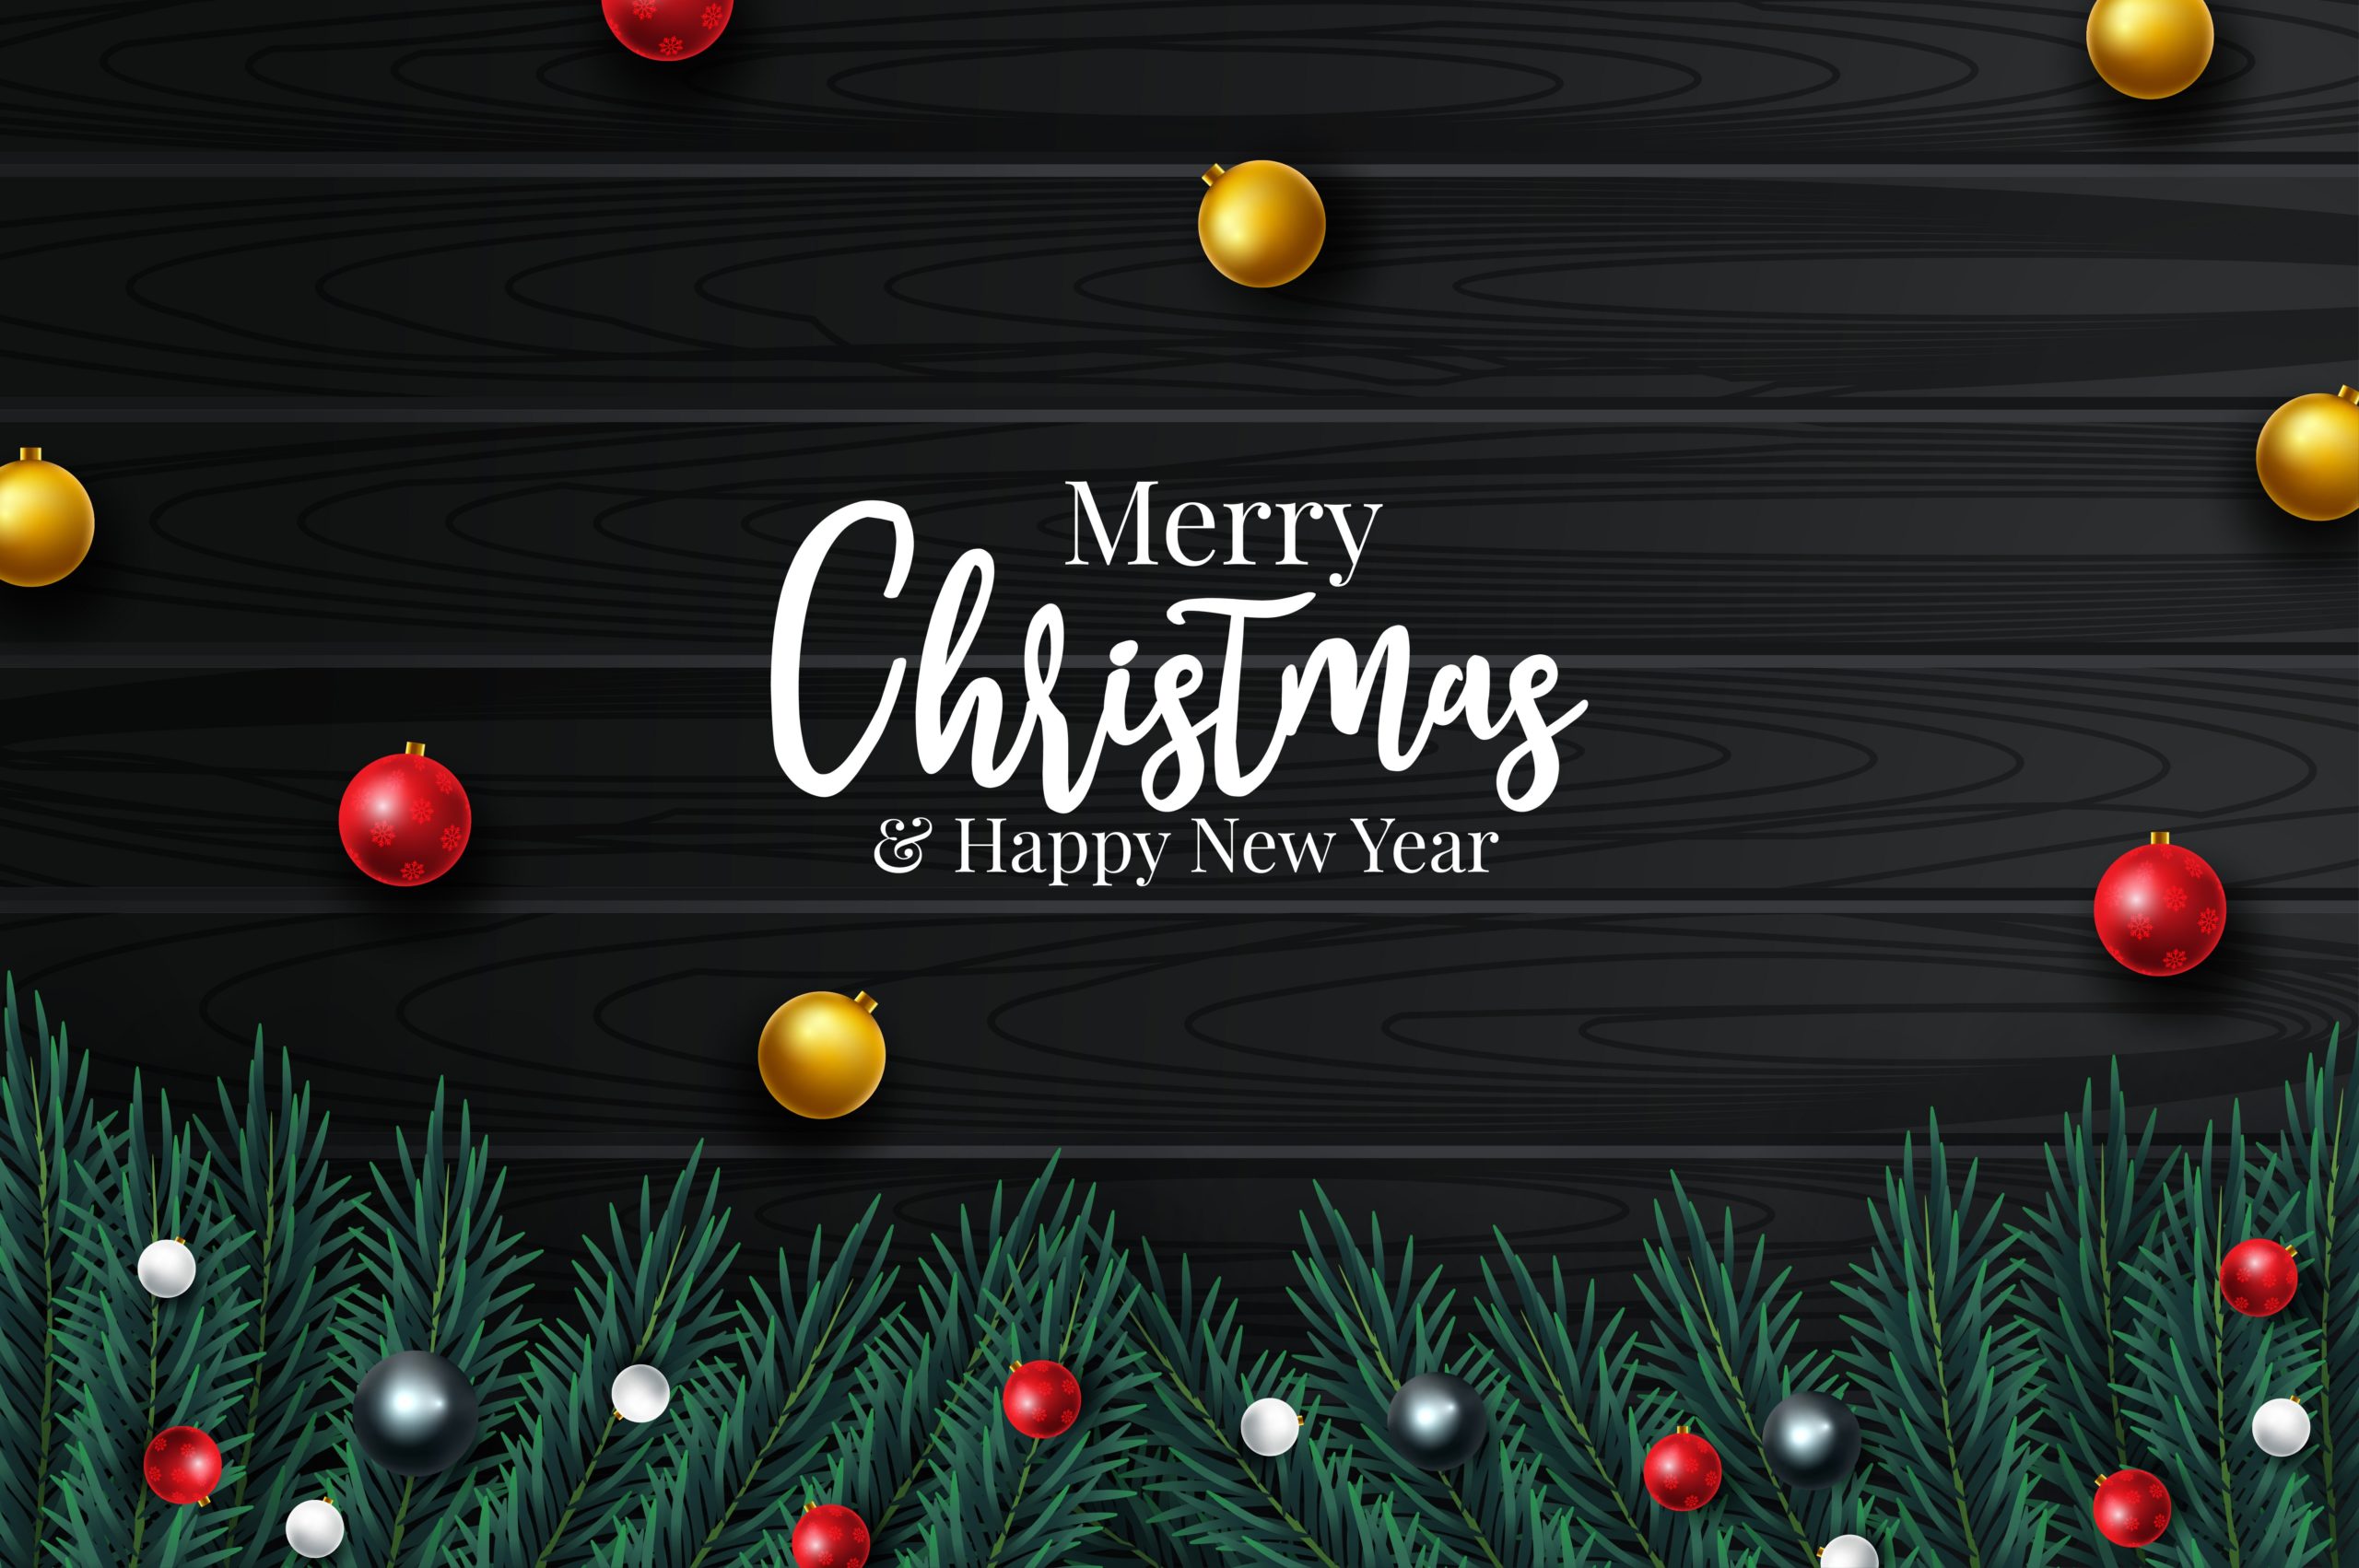 Happy Merry Christmas 2020 Wishes Messages Images Free Dow